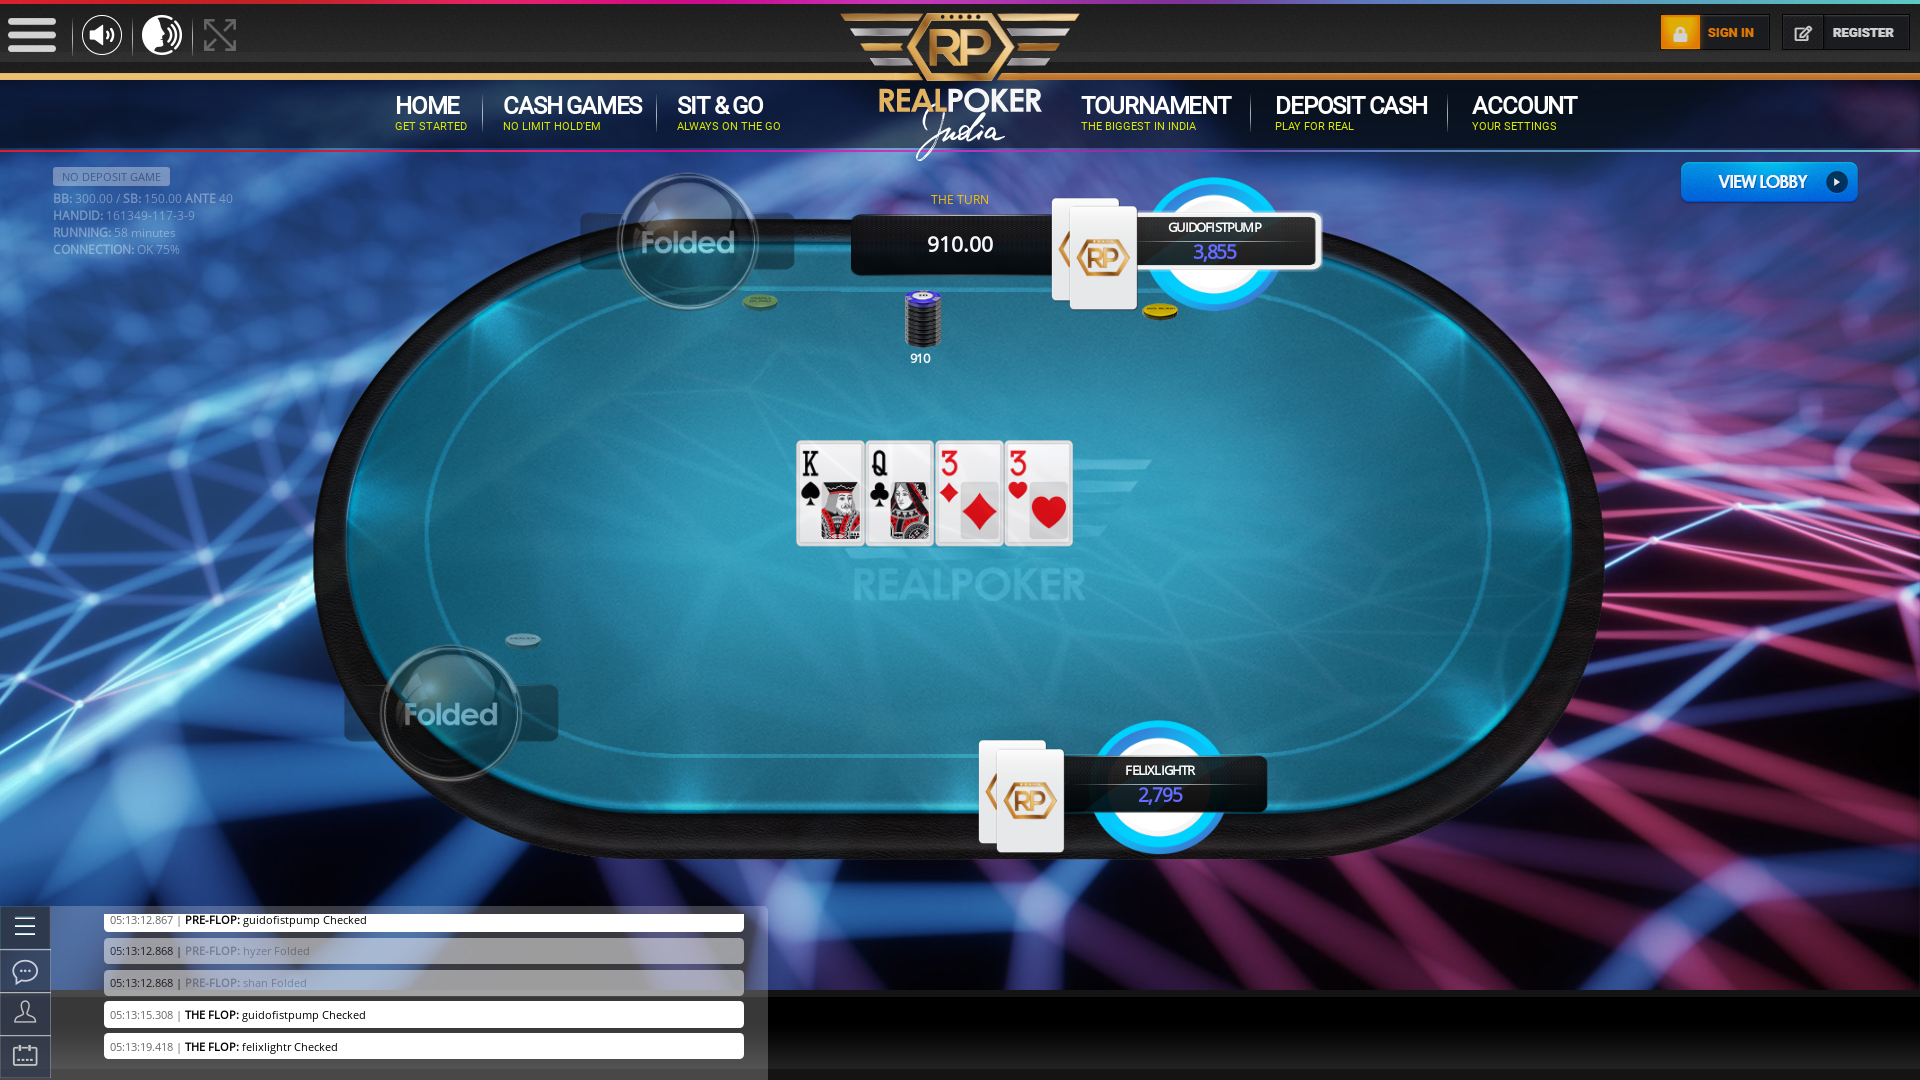 Real poker 10 player table in the 58th minute